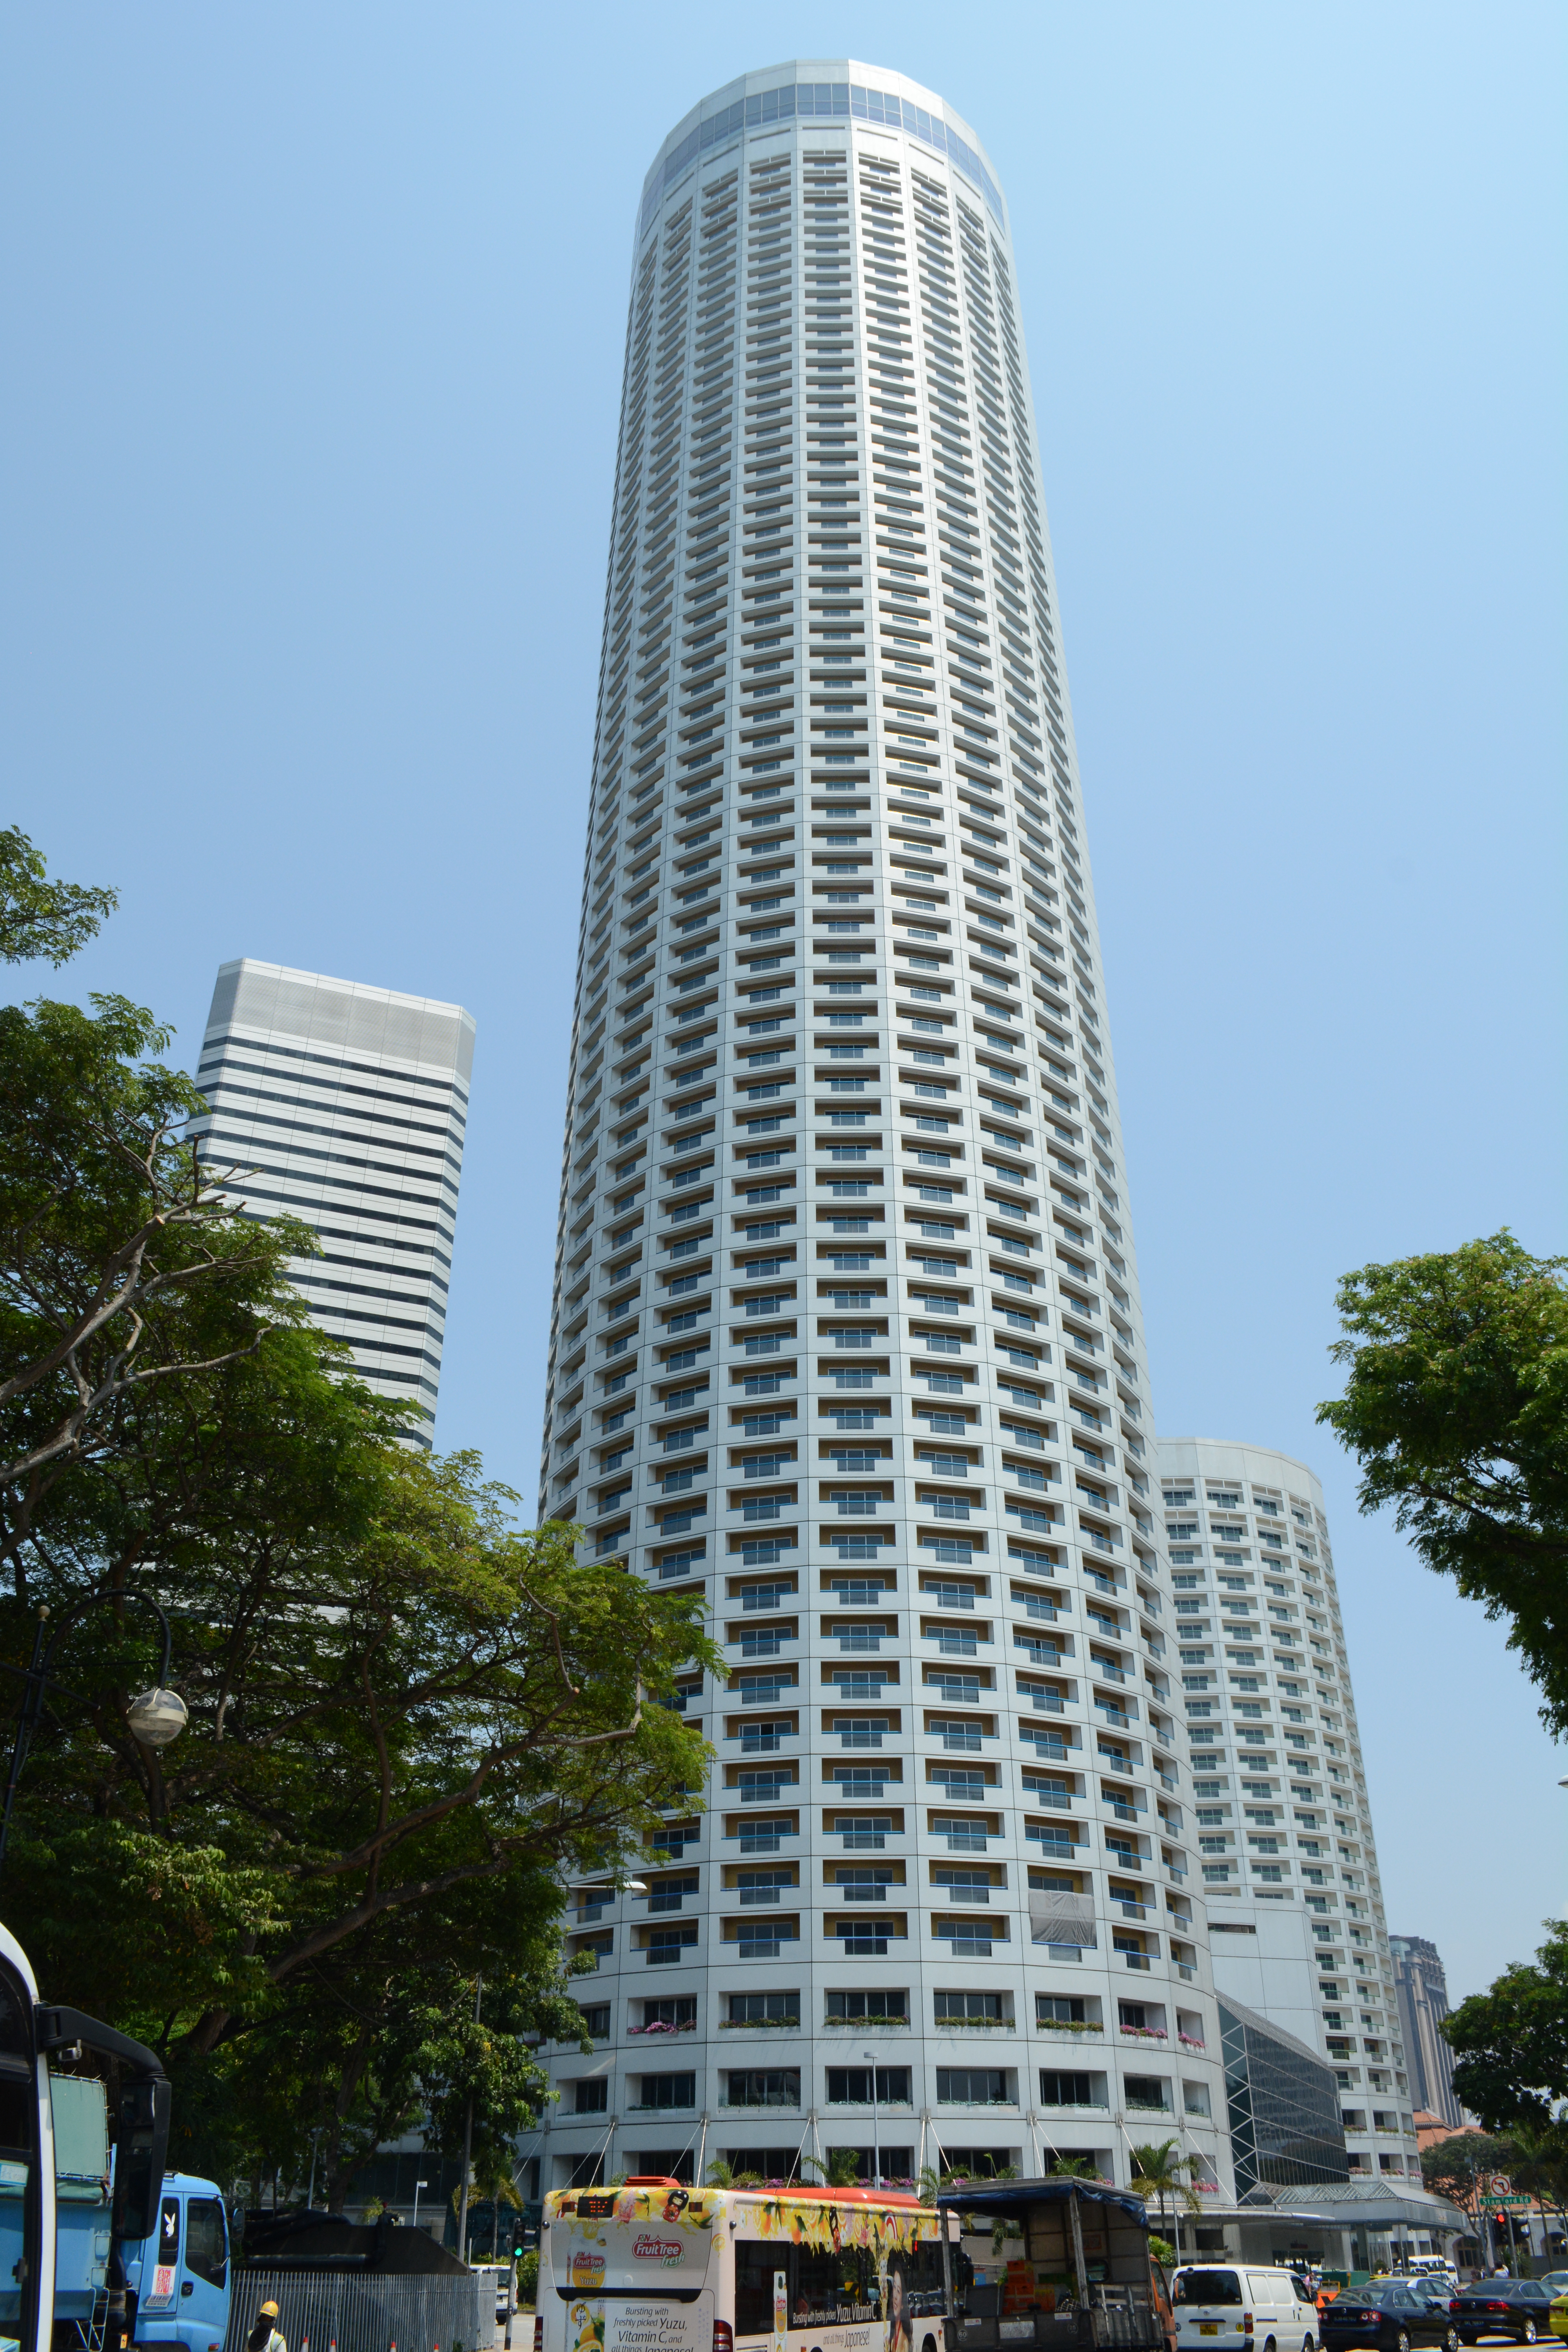 Now That's a Tall Building – Heidi's Adventures